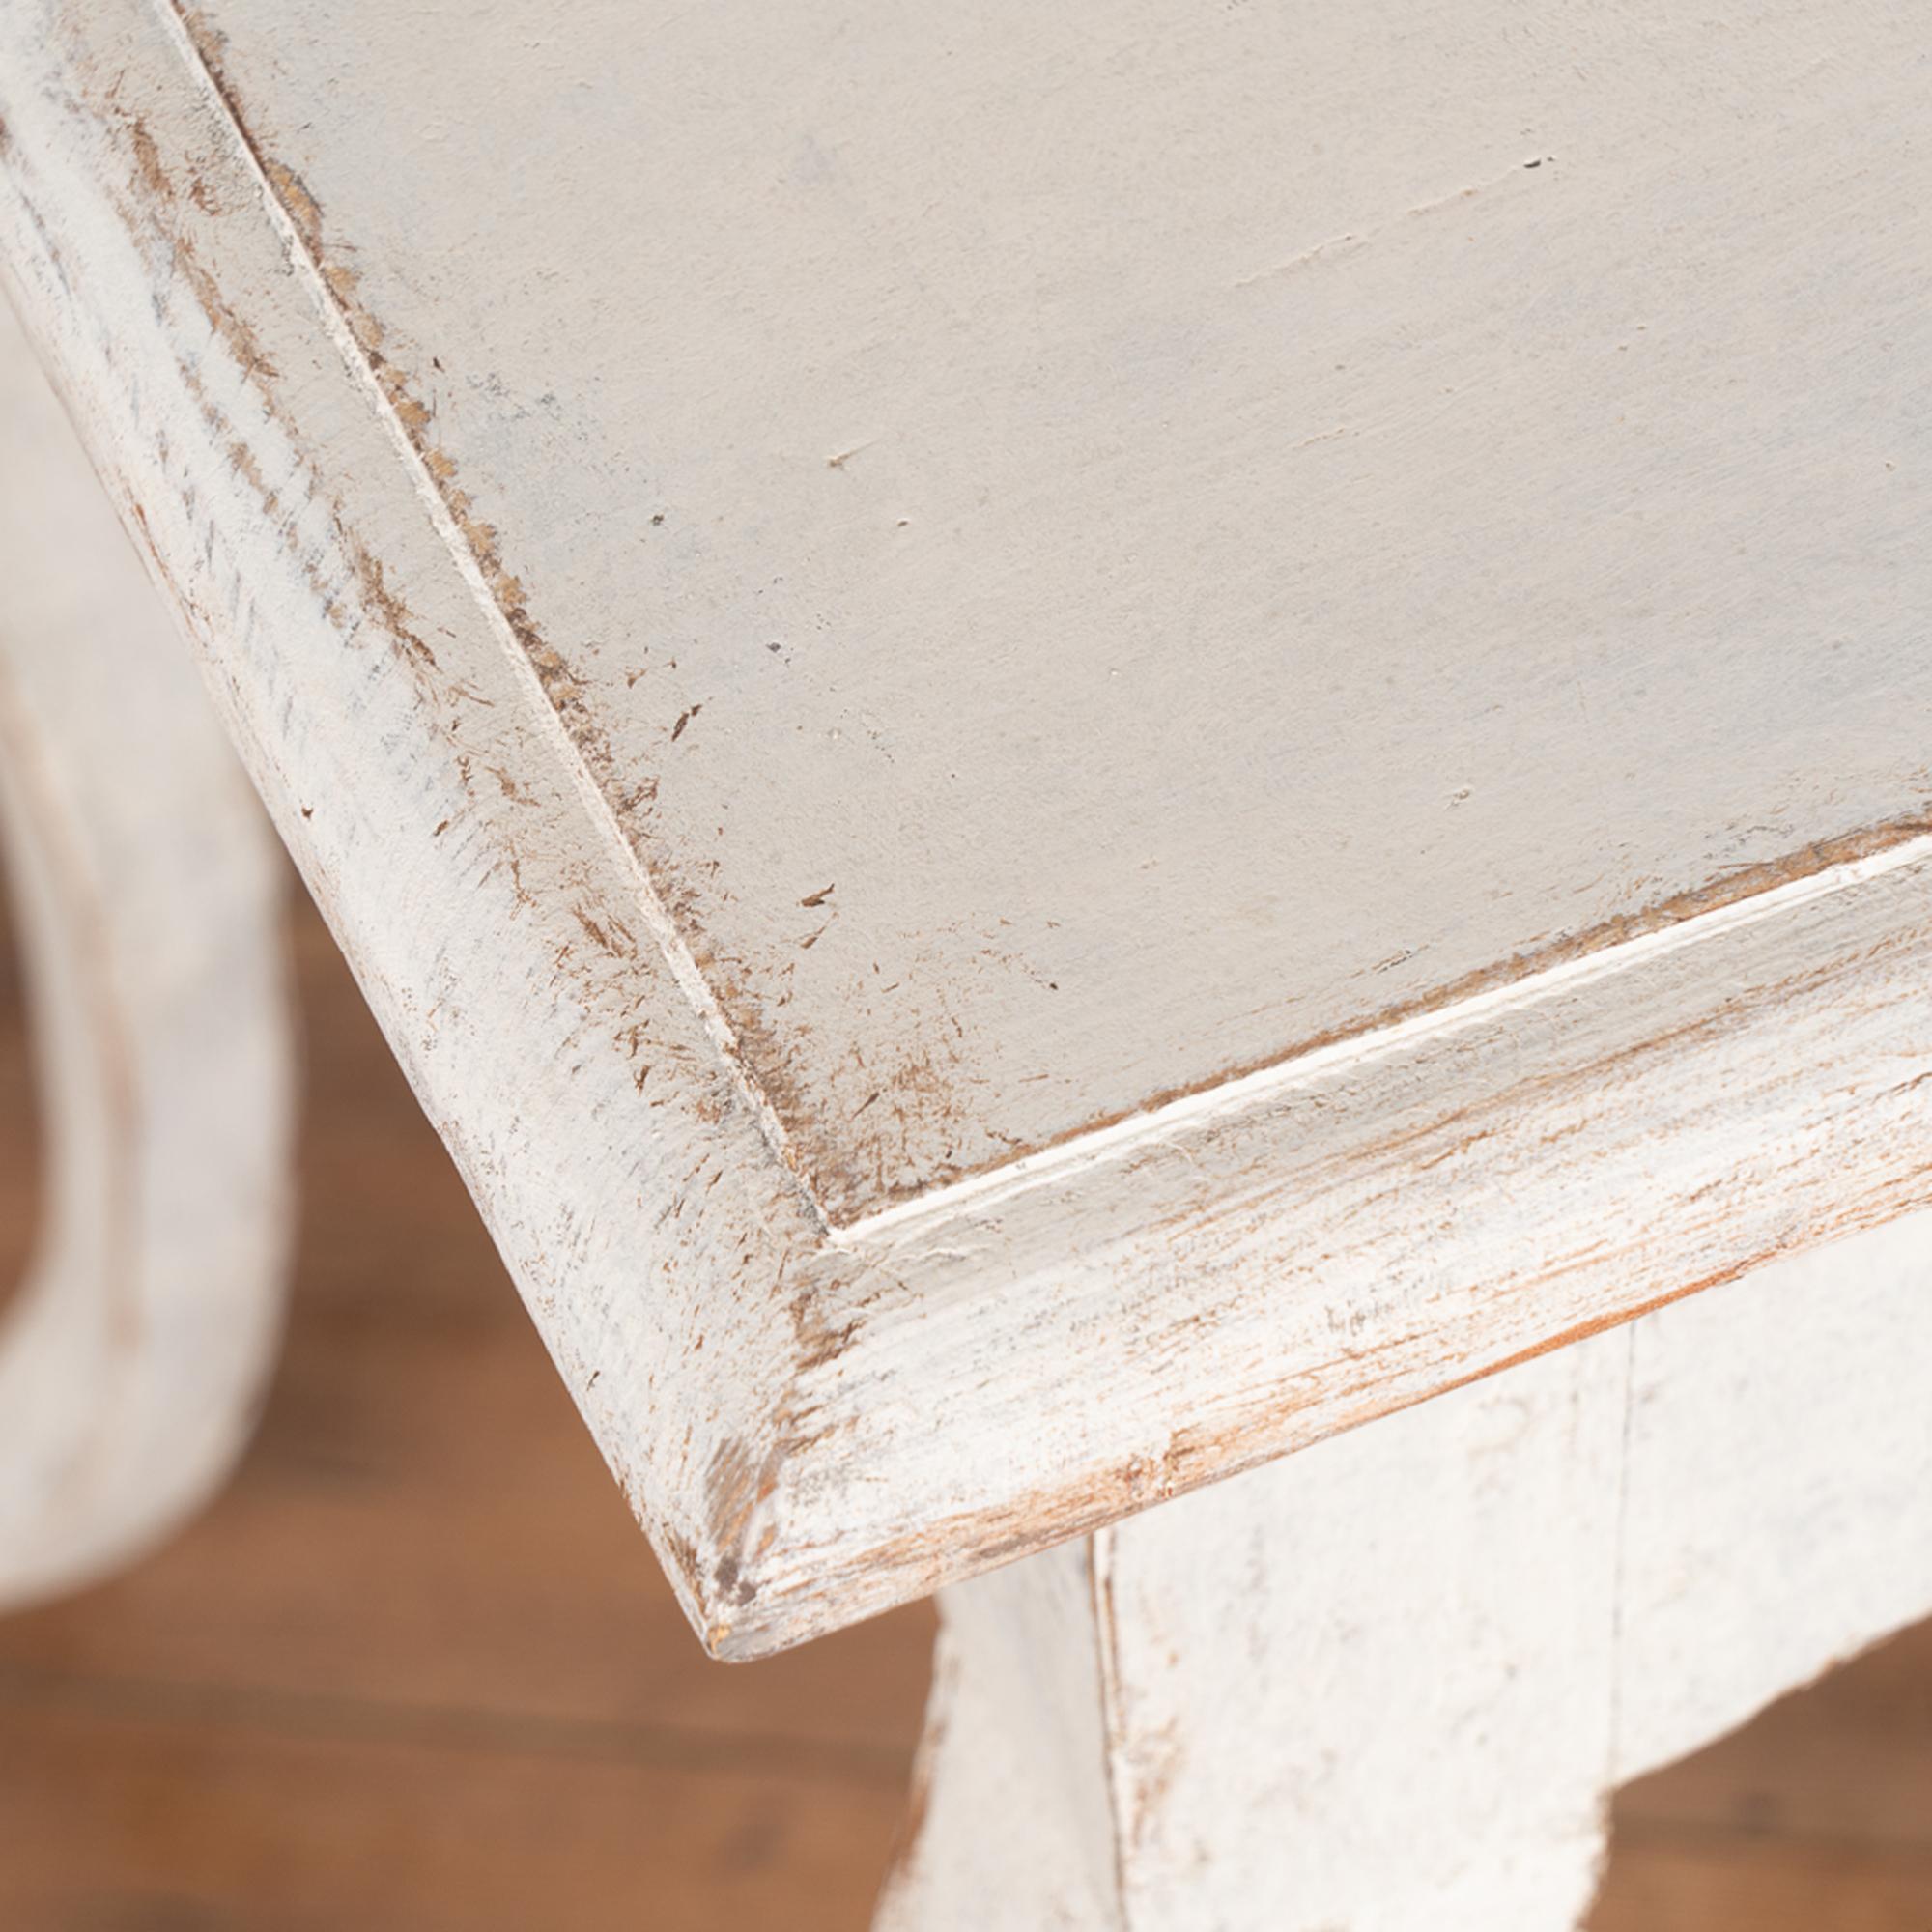 White Gustavian Side Table with Cabriolet Legs, Sweden circa 1800-20 For Sale 1